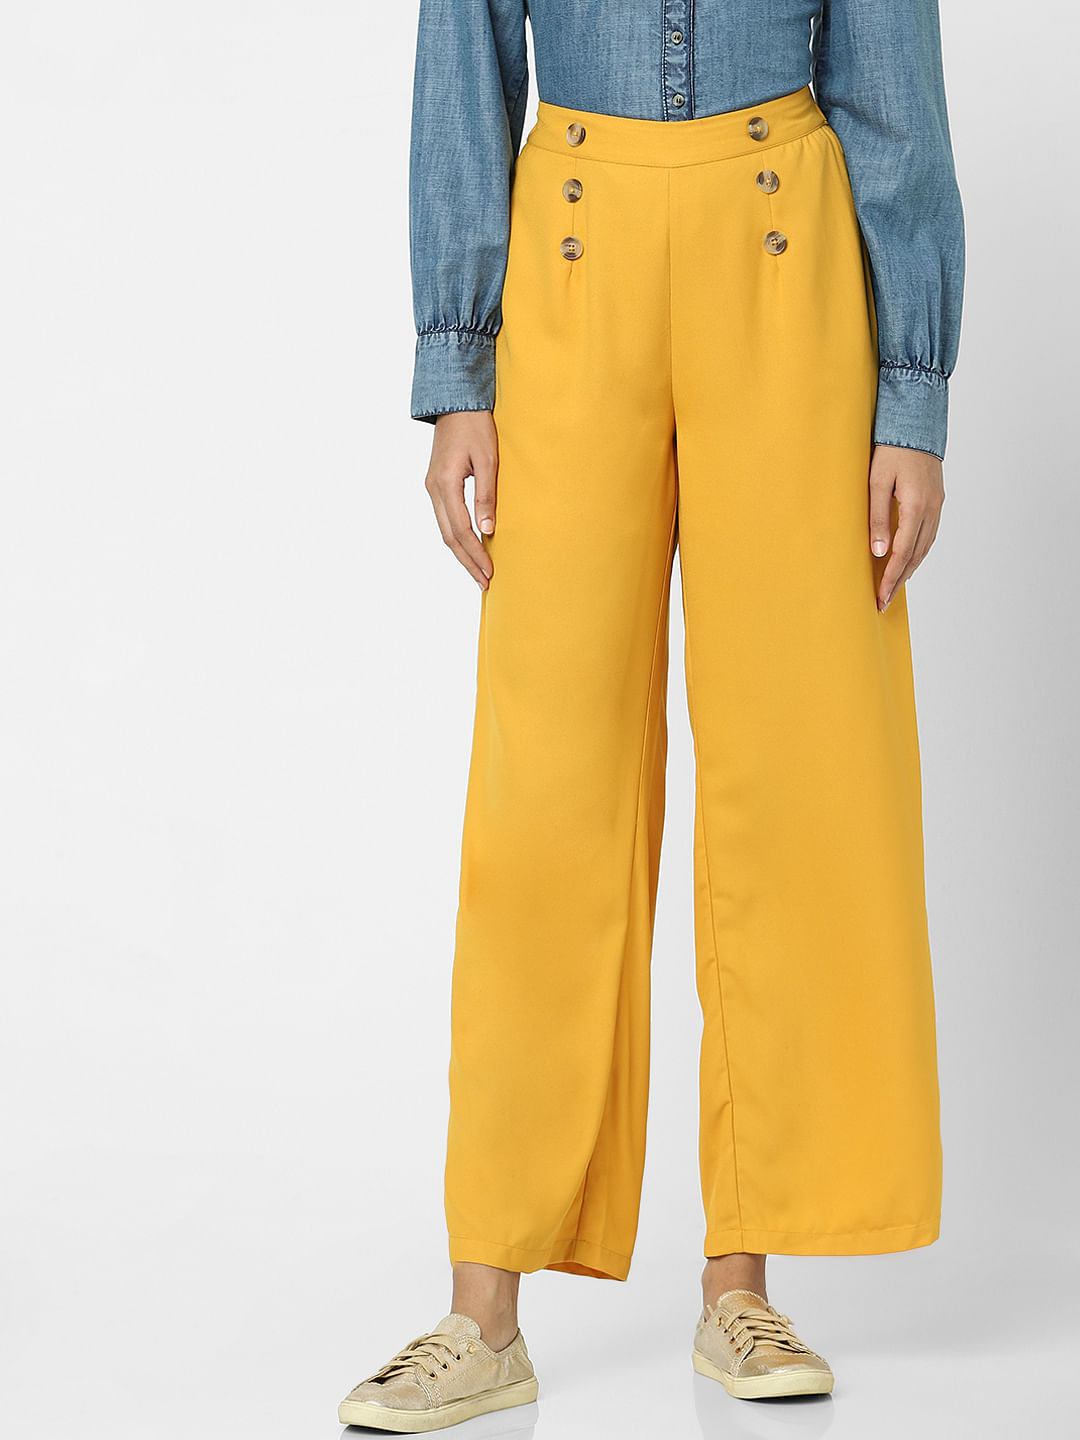 Aesthetic Bodies Joggers  Buy Aesthetic Bodies Flared Pants Yellow Online   Nykaa Fashion